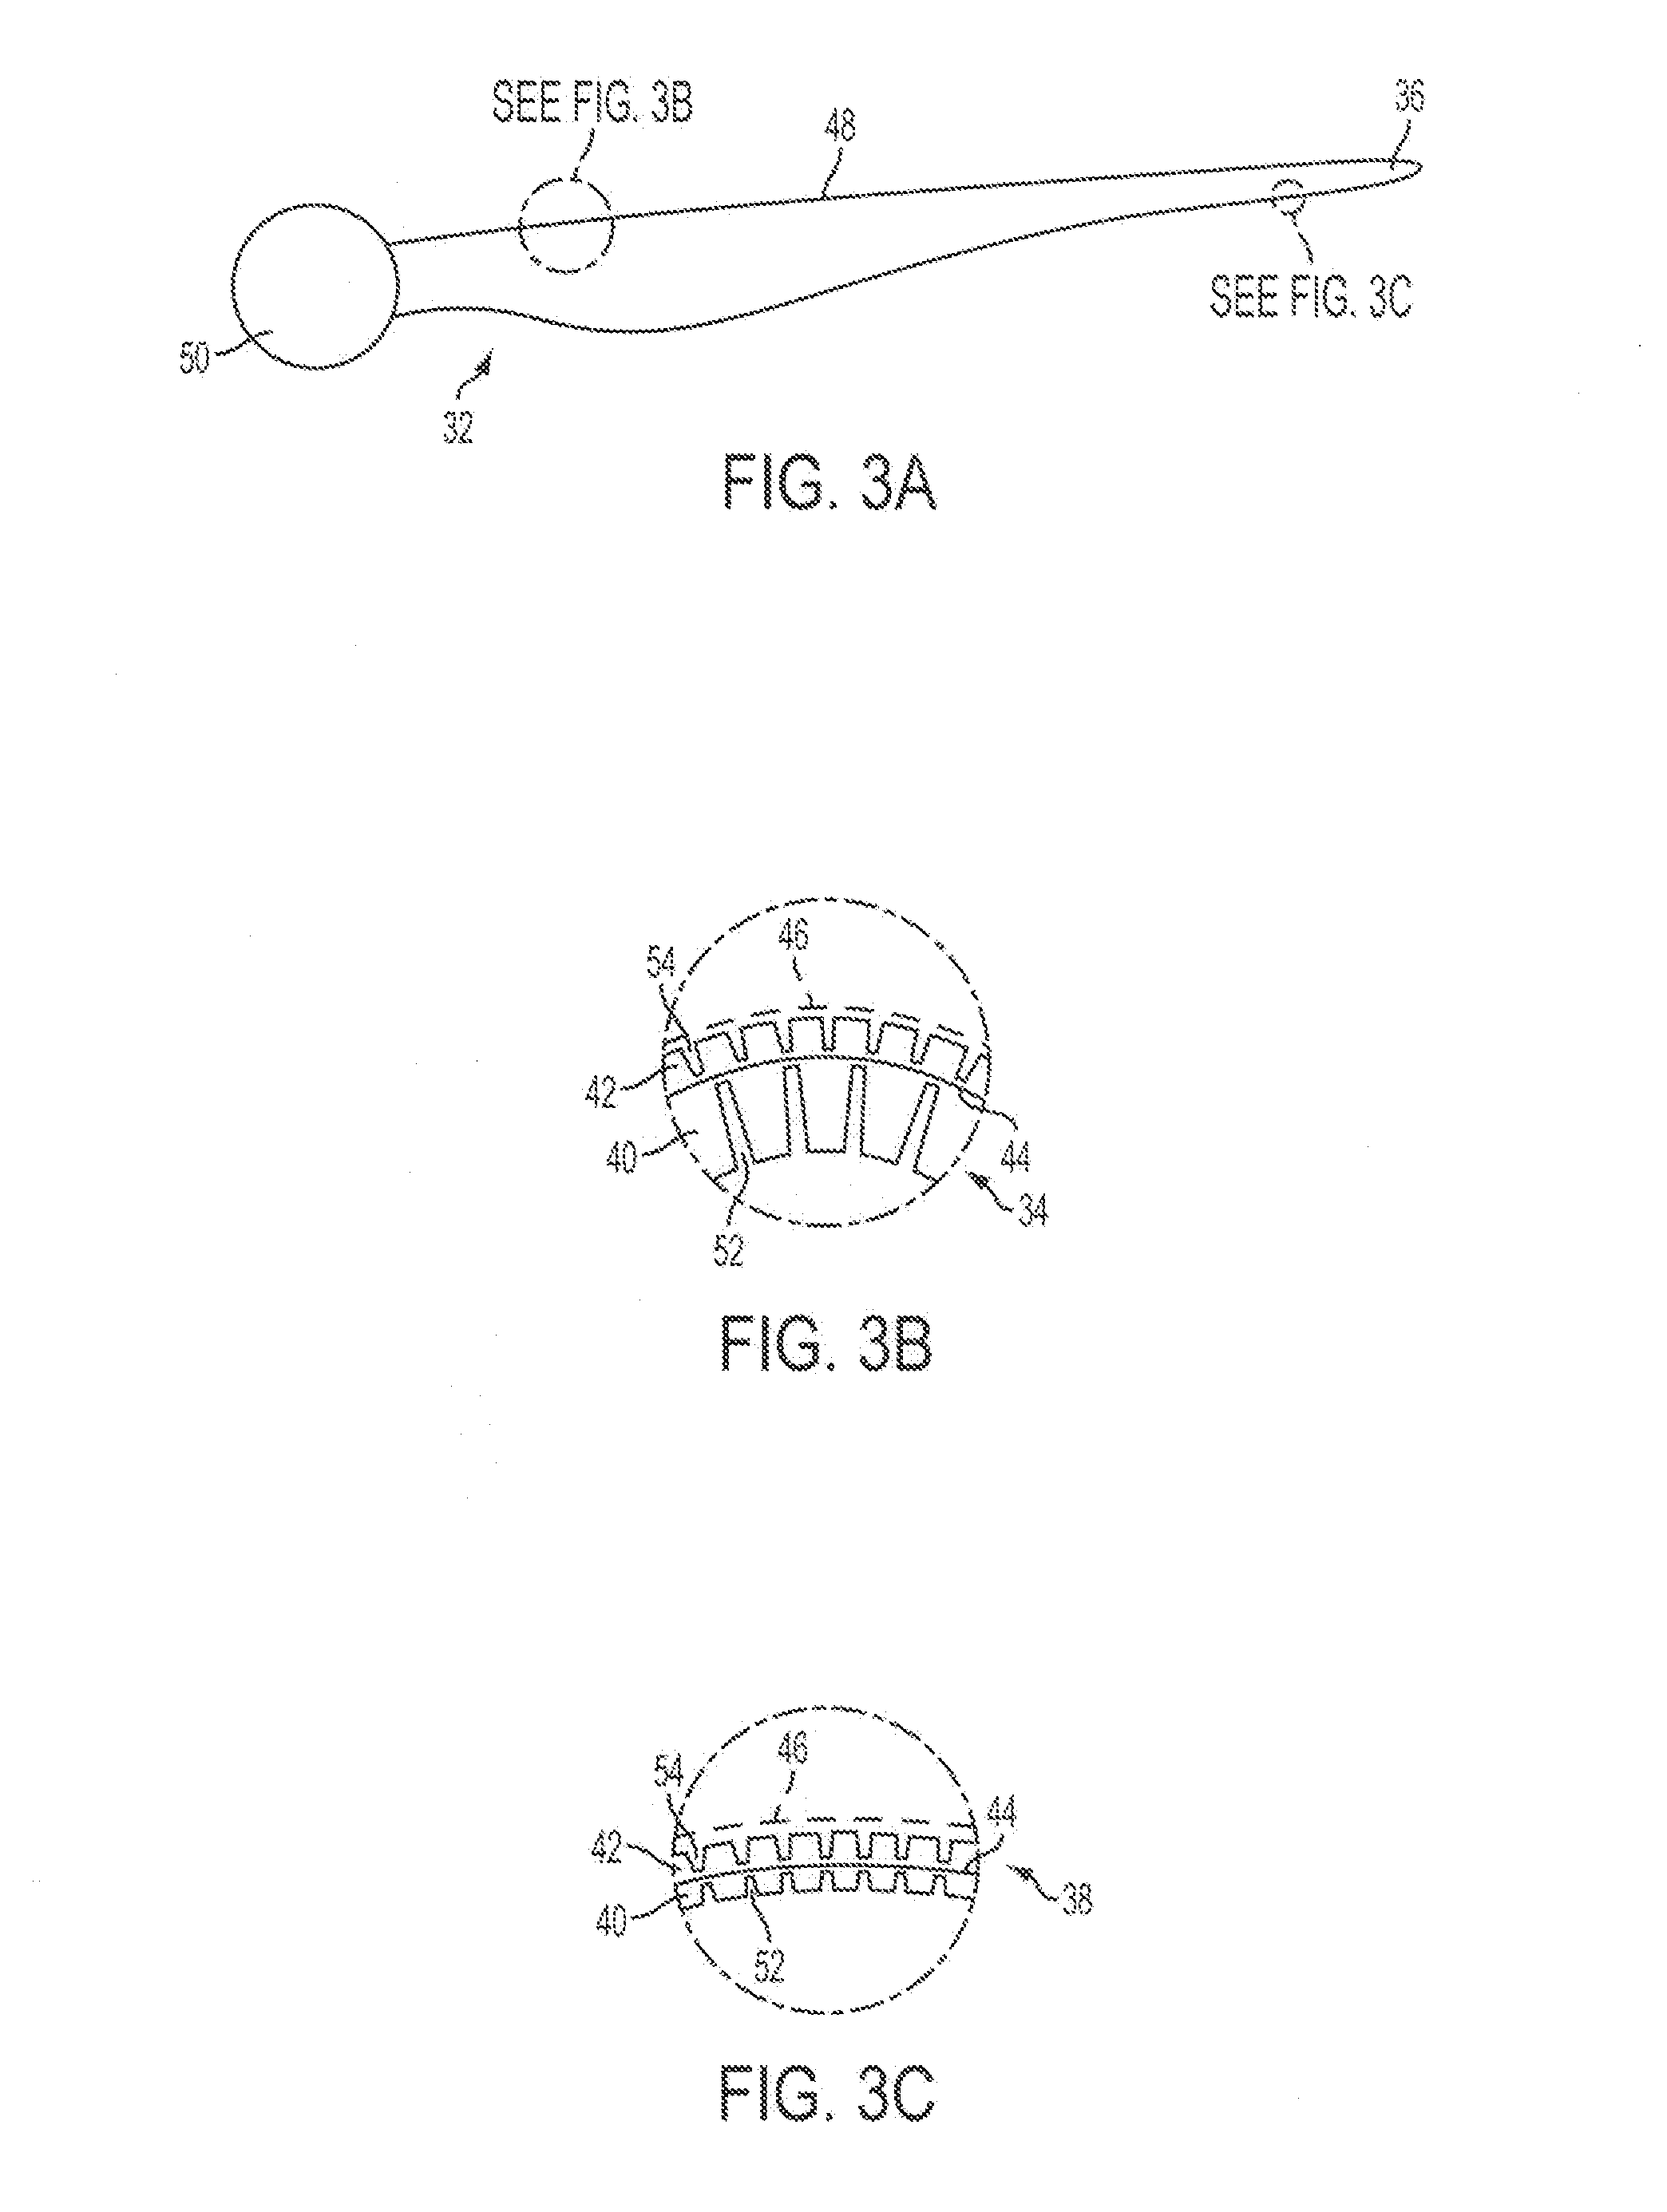 Core for a composite structure and method of fabrication thereof